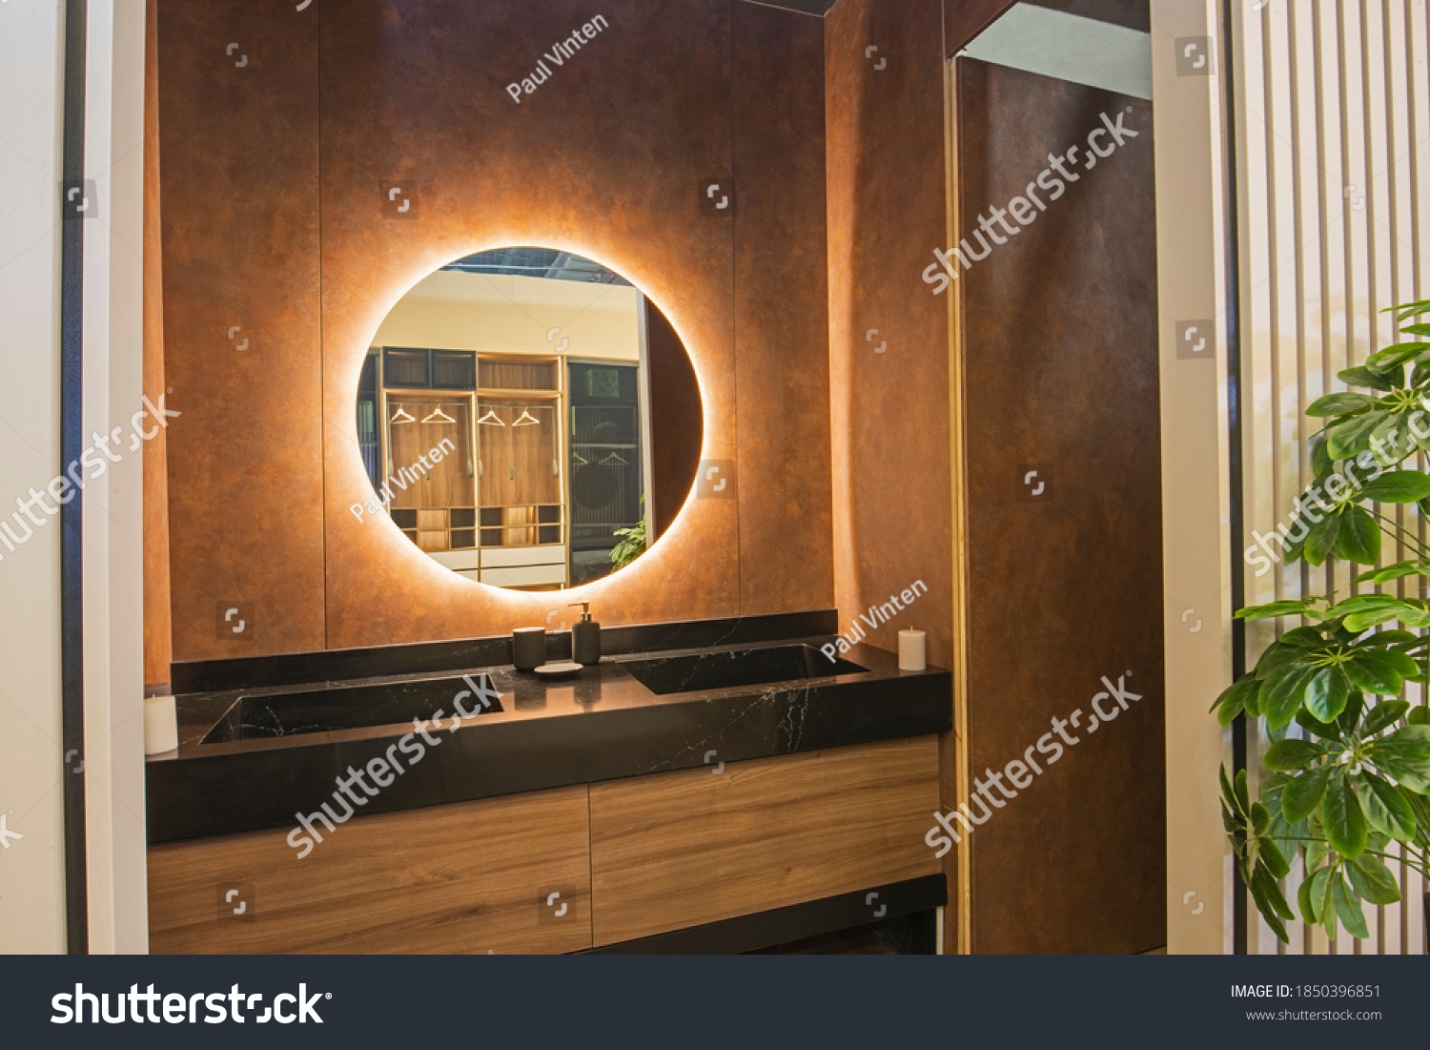 hide led strip behind mirror stock-photo-interior-design-of-a-luxury-show-home-bathroom-with-twin-sinks-and-round-mirror-1850396851.jpg